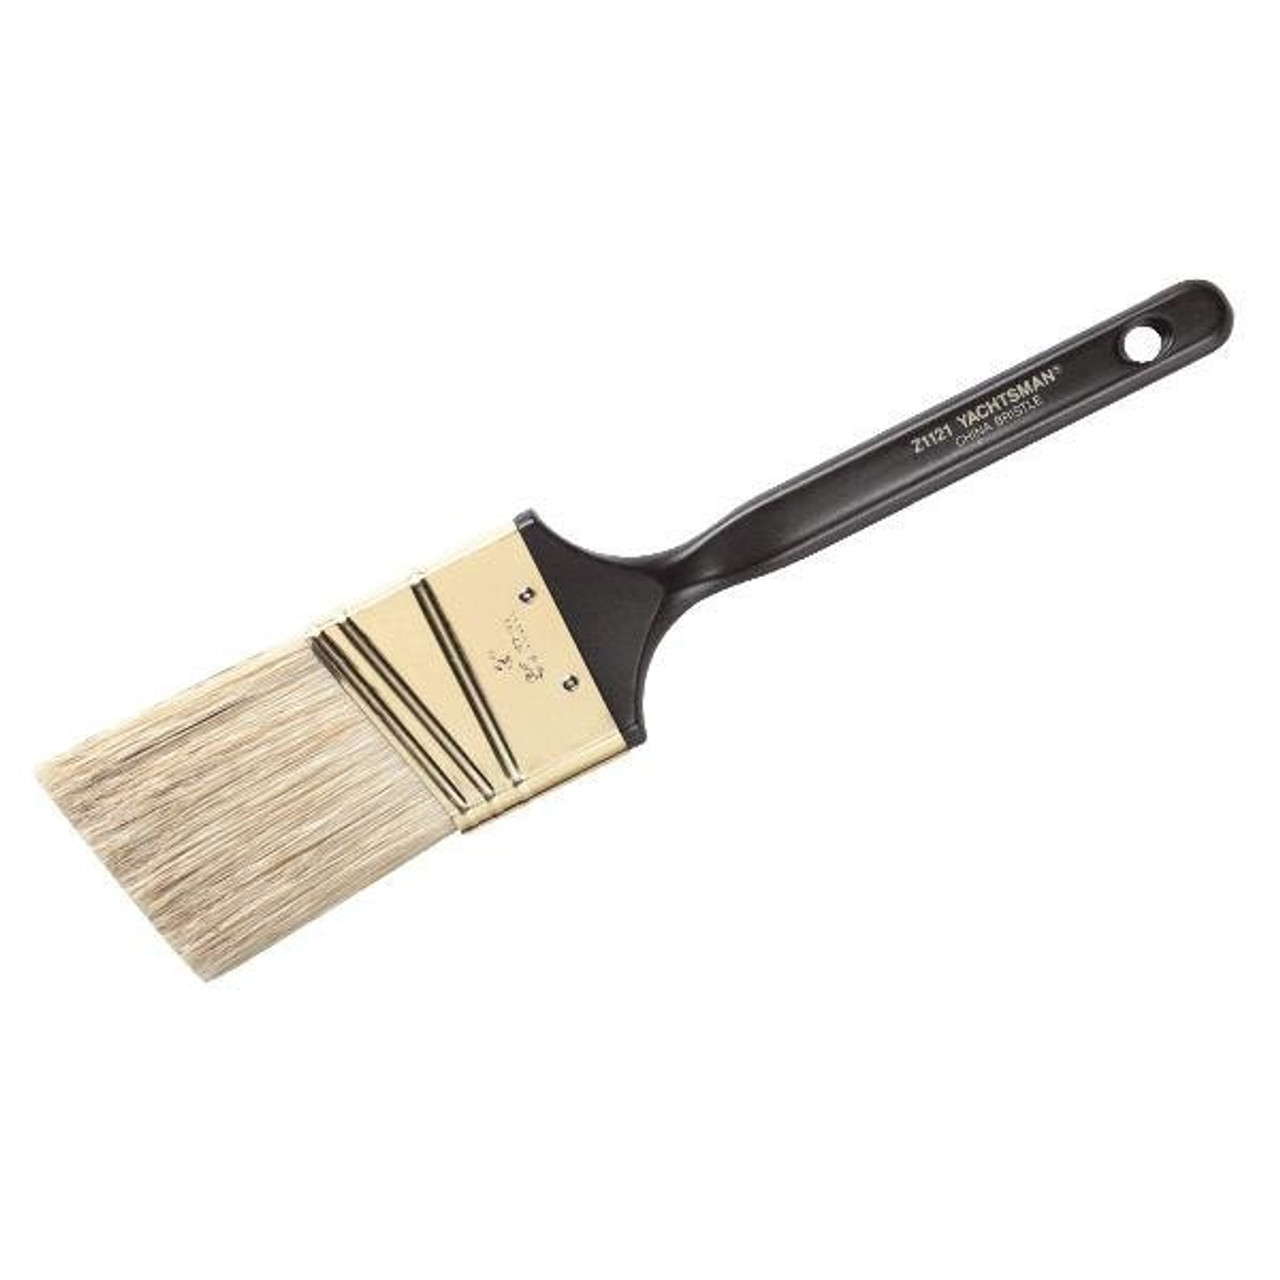 Wooster Alpha 1-1/2 Angled Brush (4230-1.5)